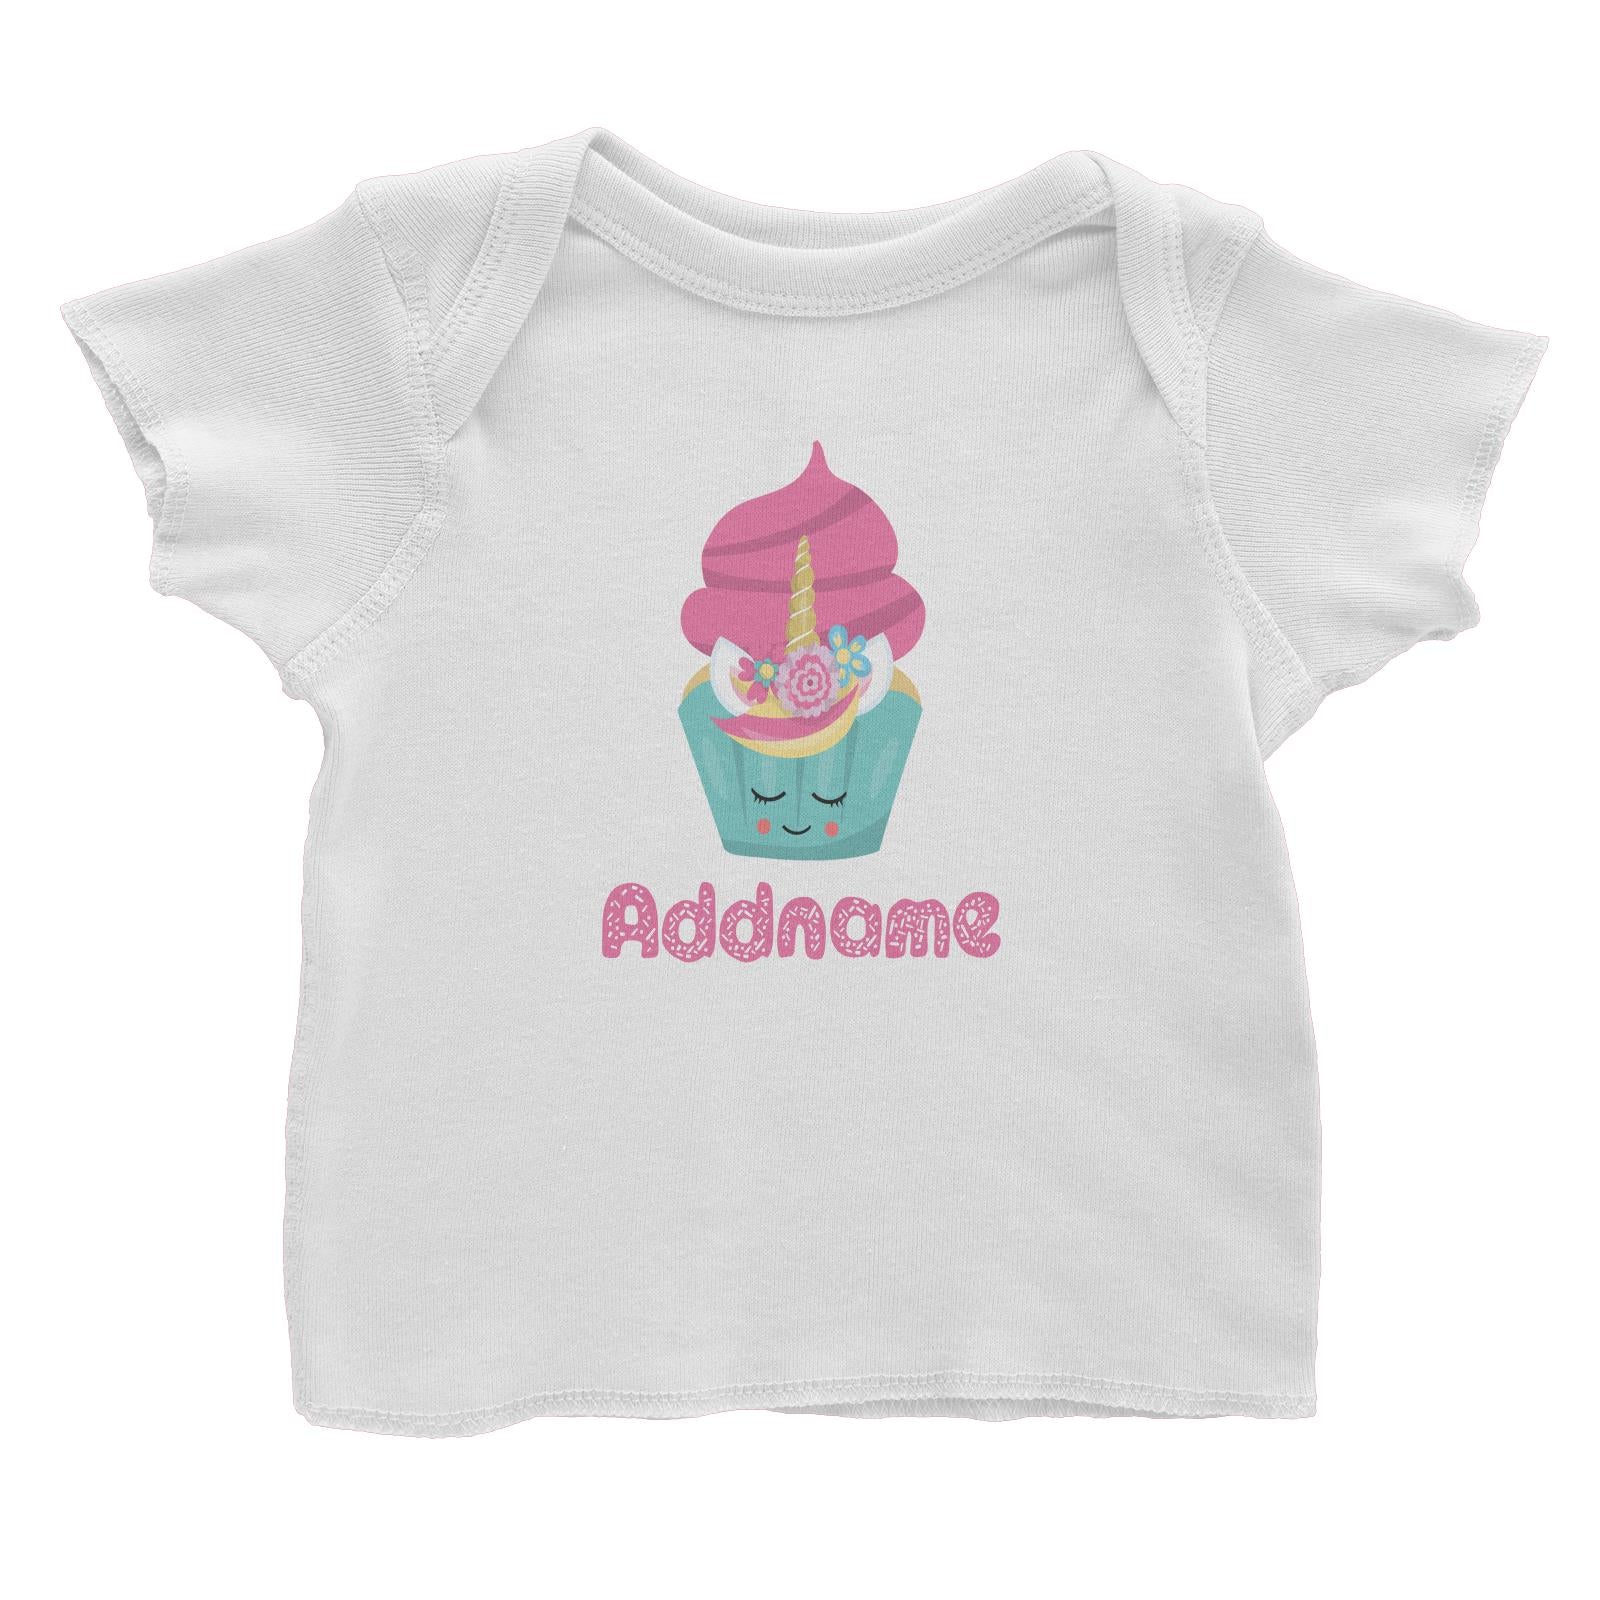 Magical Sweets Green Cupcake Addname Baby T-Shirt